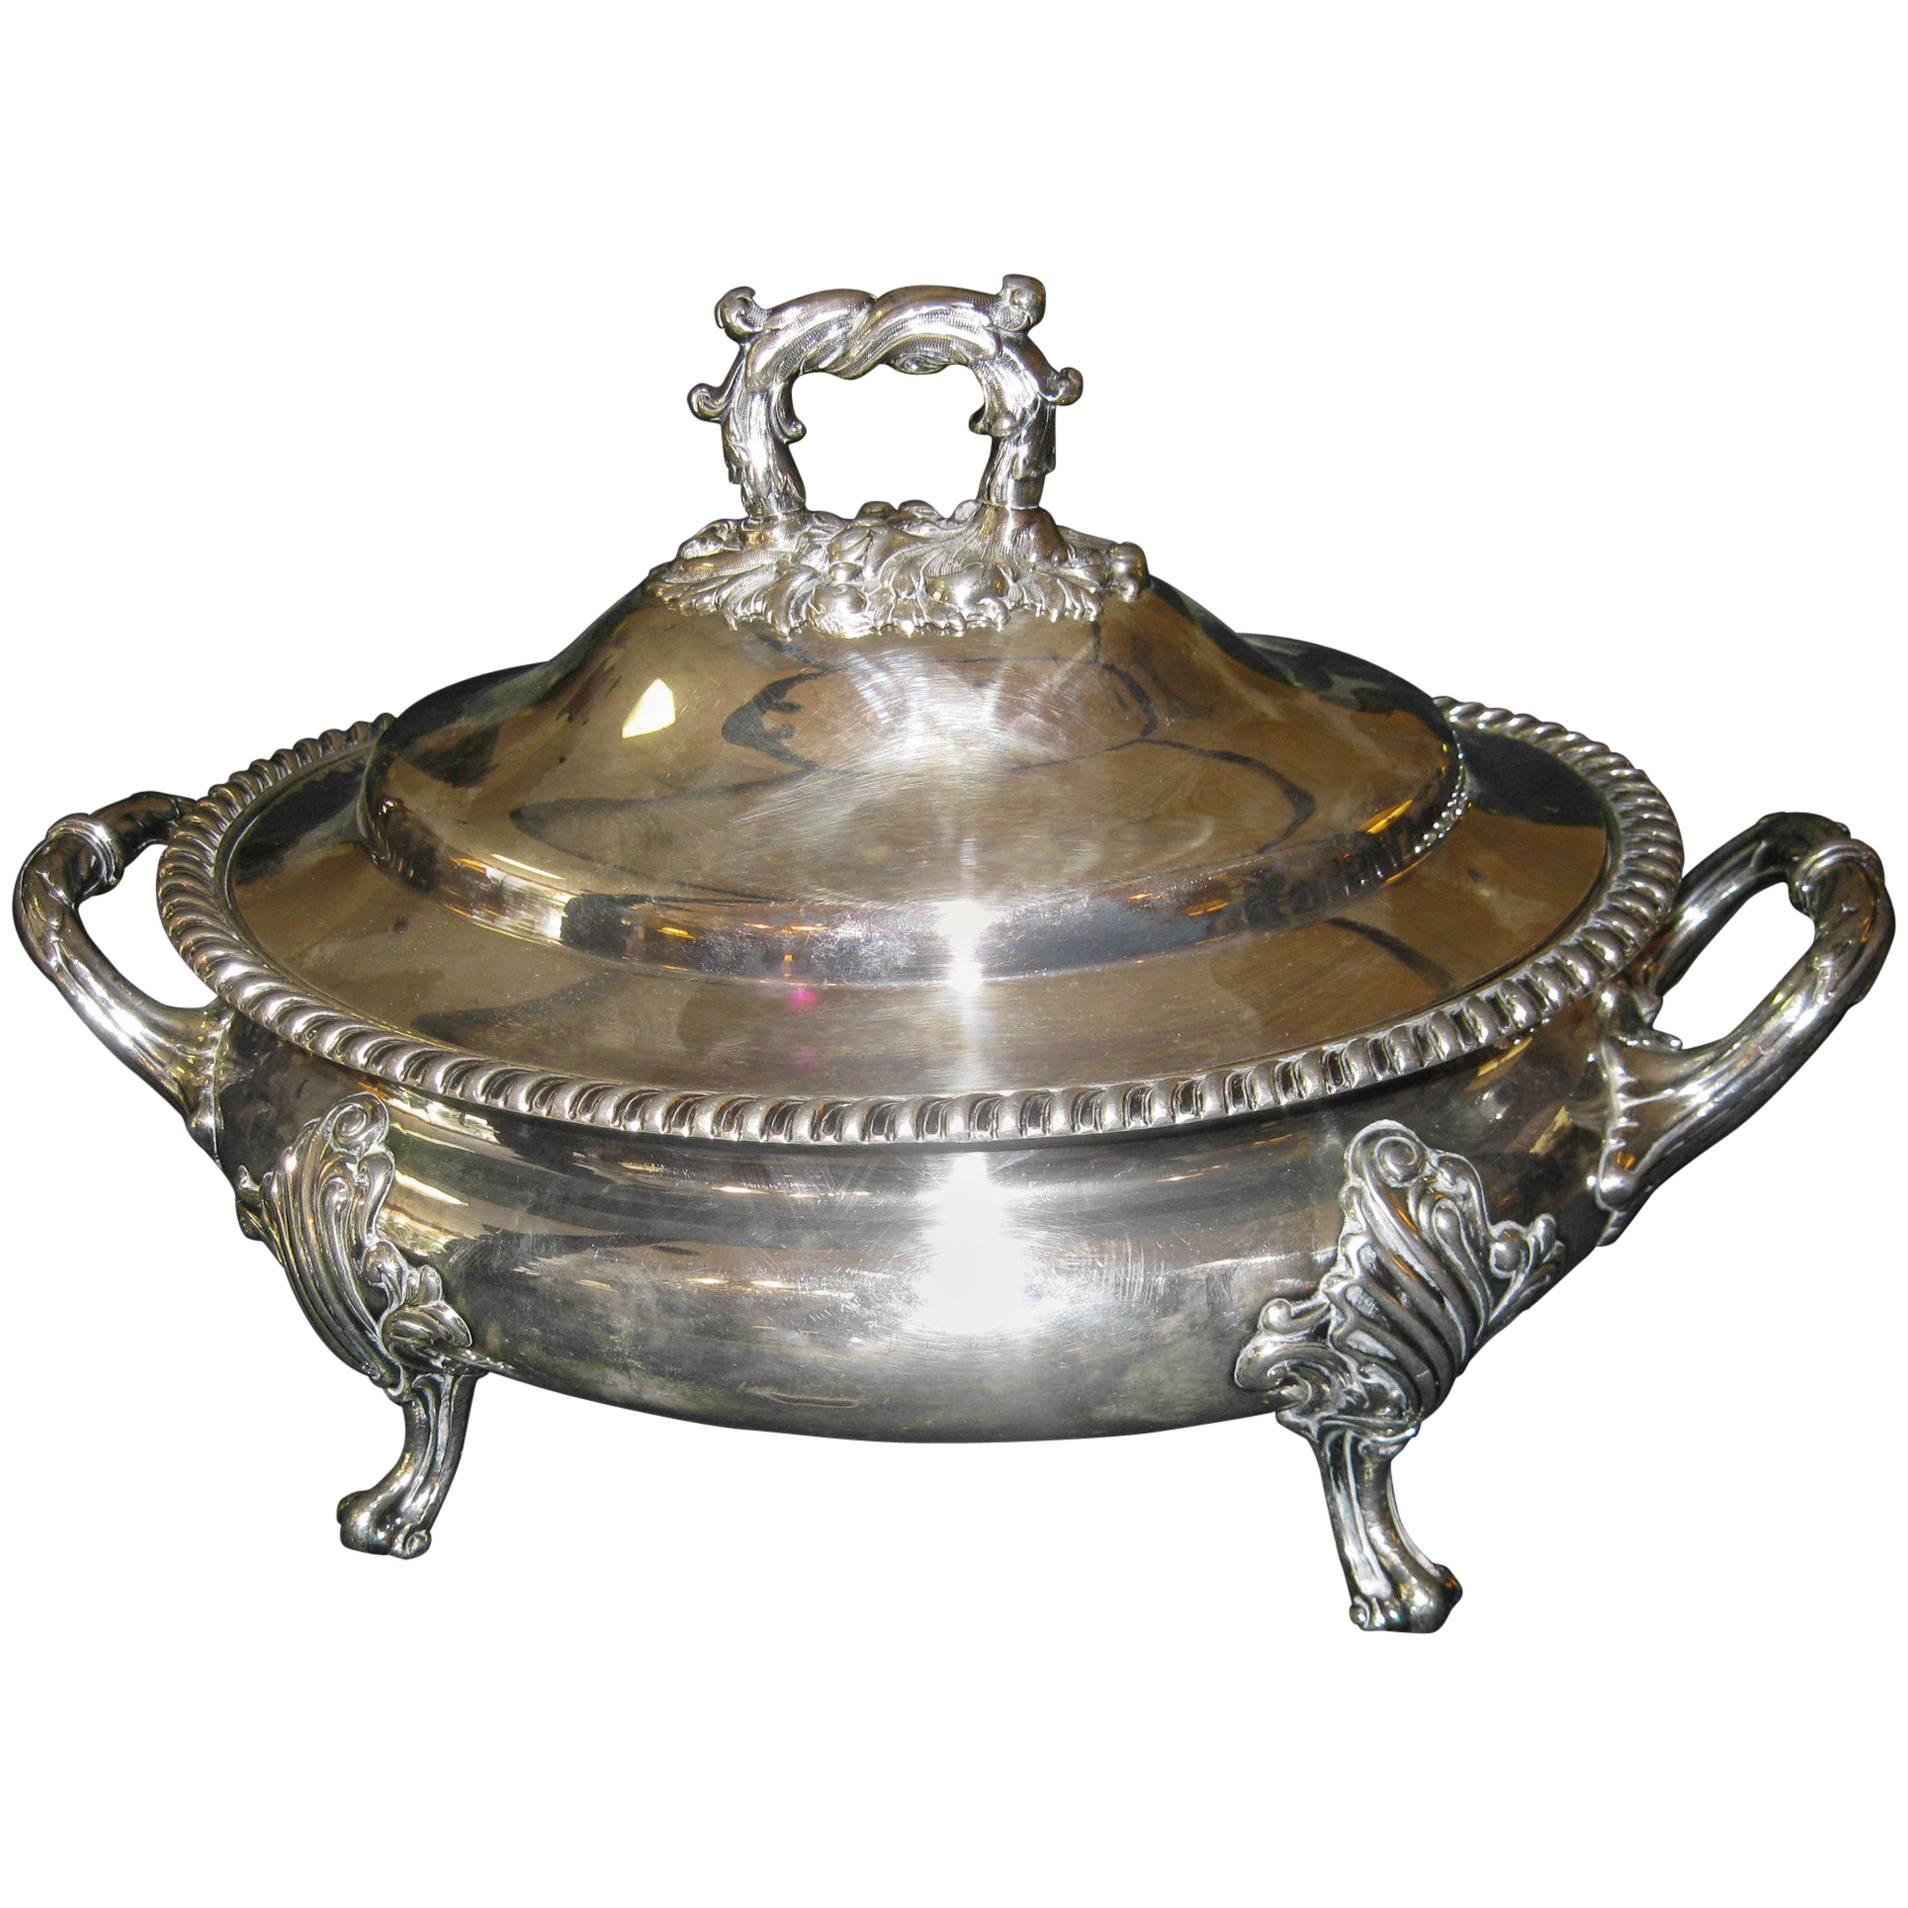 19th century Sheffield Silver Regency Style Tureen Walker, Knowles and Company